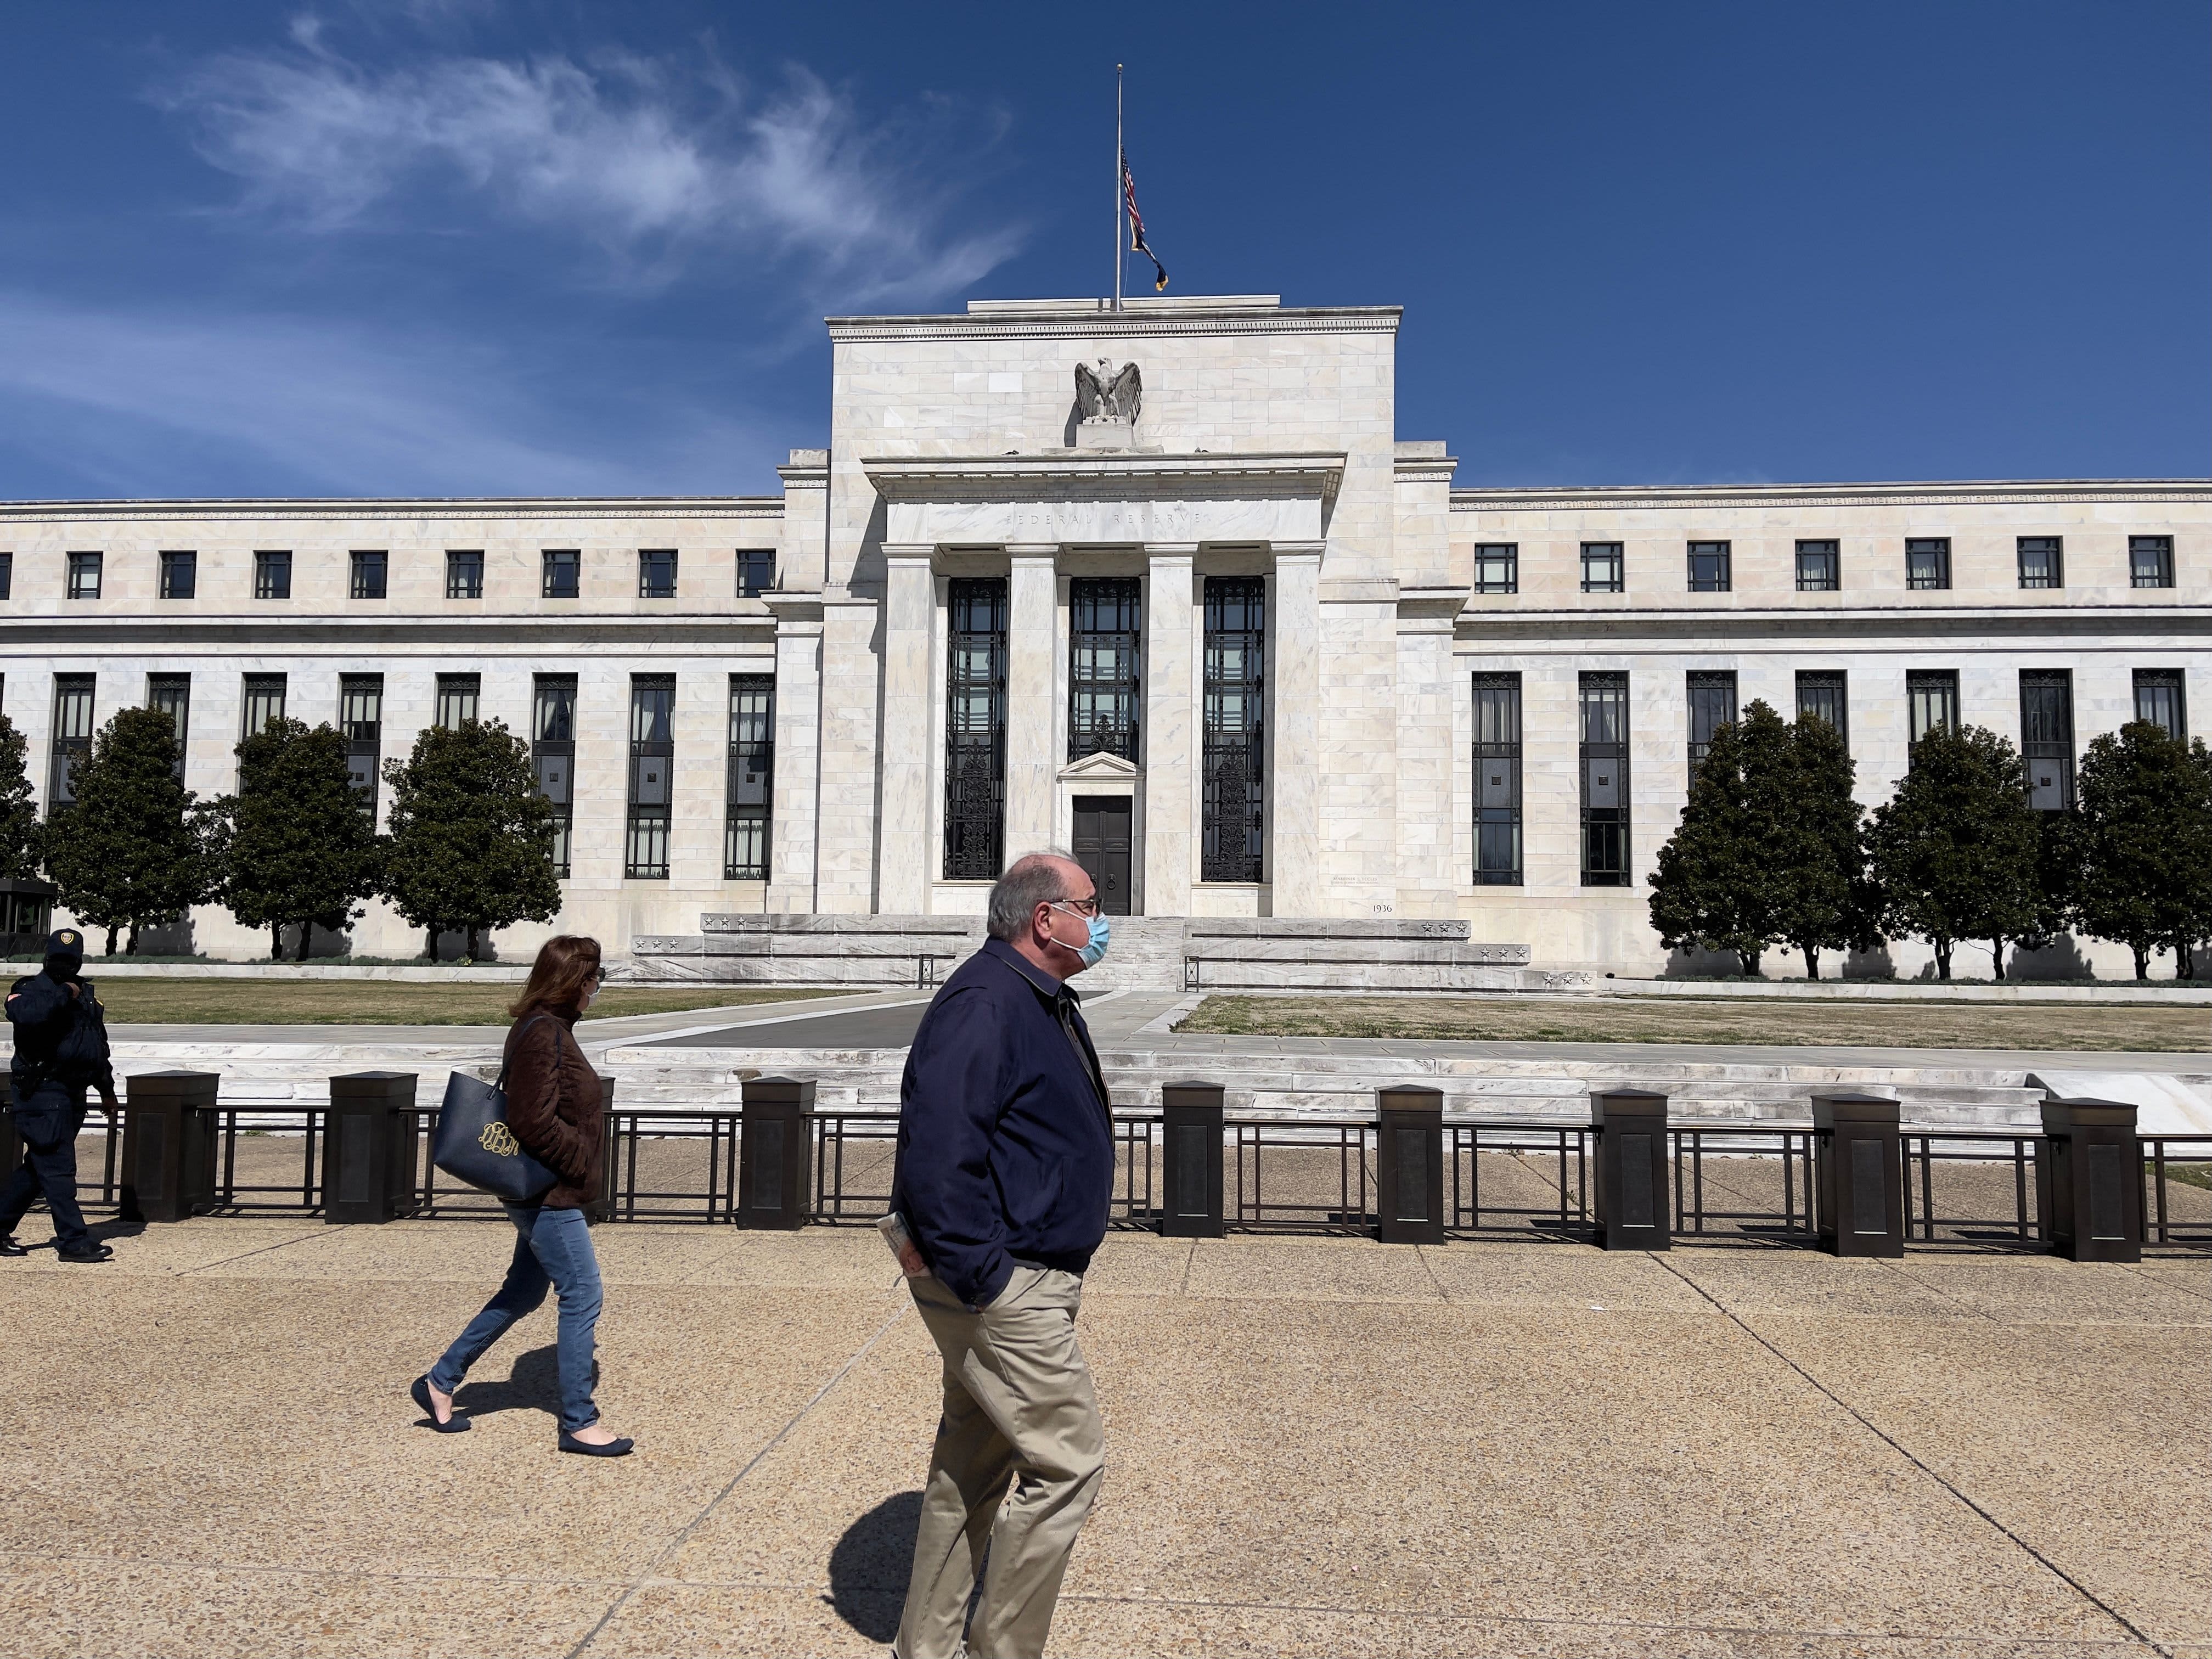 March jobs report provides Fed coverage of monetary policy